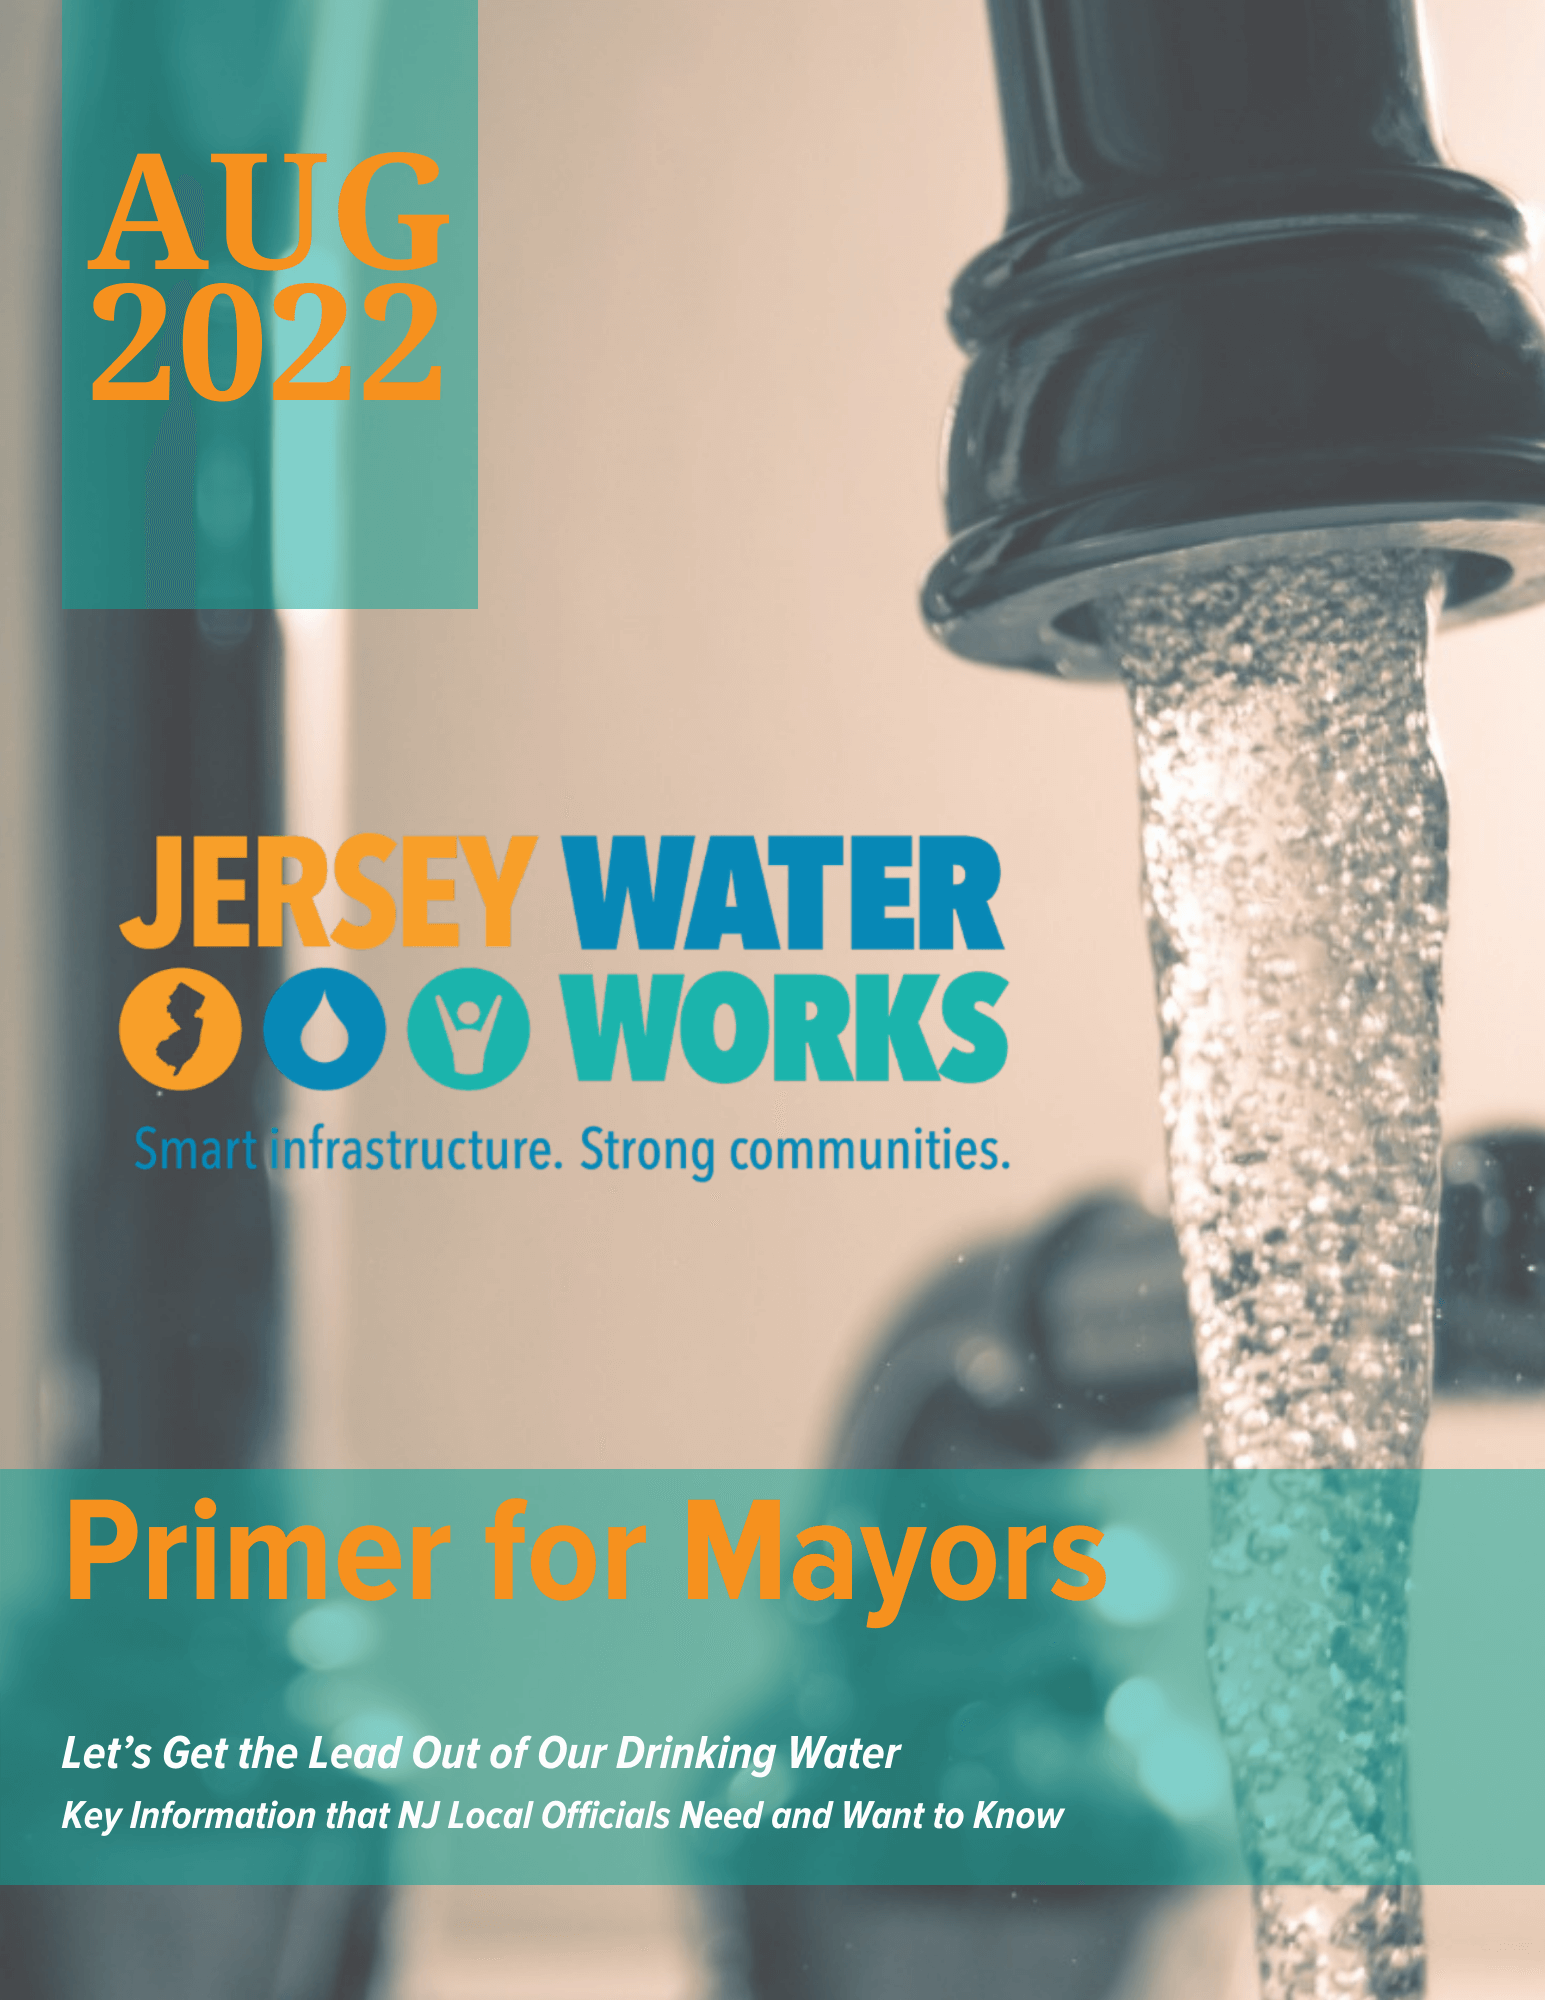 Cover graphic of Primer for Mayors on Lead in Drinking Water pdf file